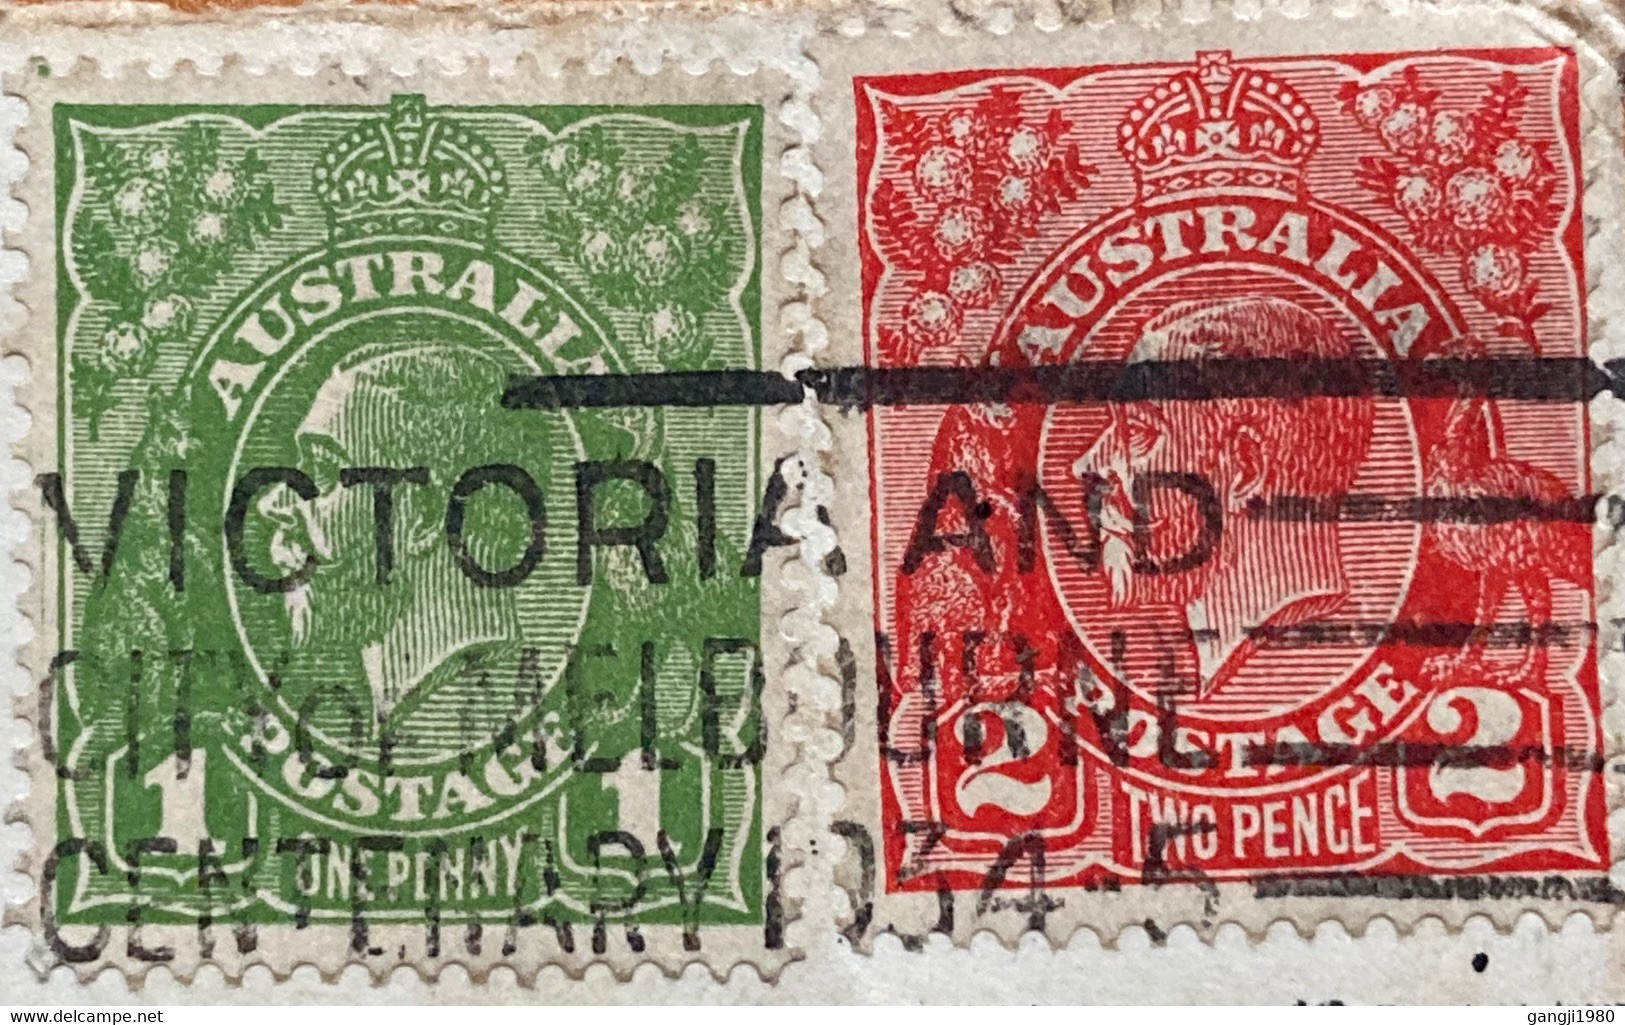 AUSTRALIA 1934, KING GEORGE 2 STAMPS,SLOGAN VICTORIA & CITY MELBOURNE CENTENARY-1934 WITH SPECIAL PREPRINTED USED COVER - Covers & Documents